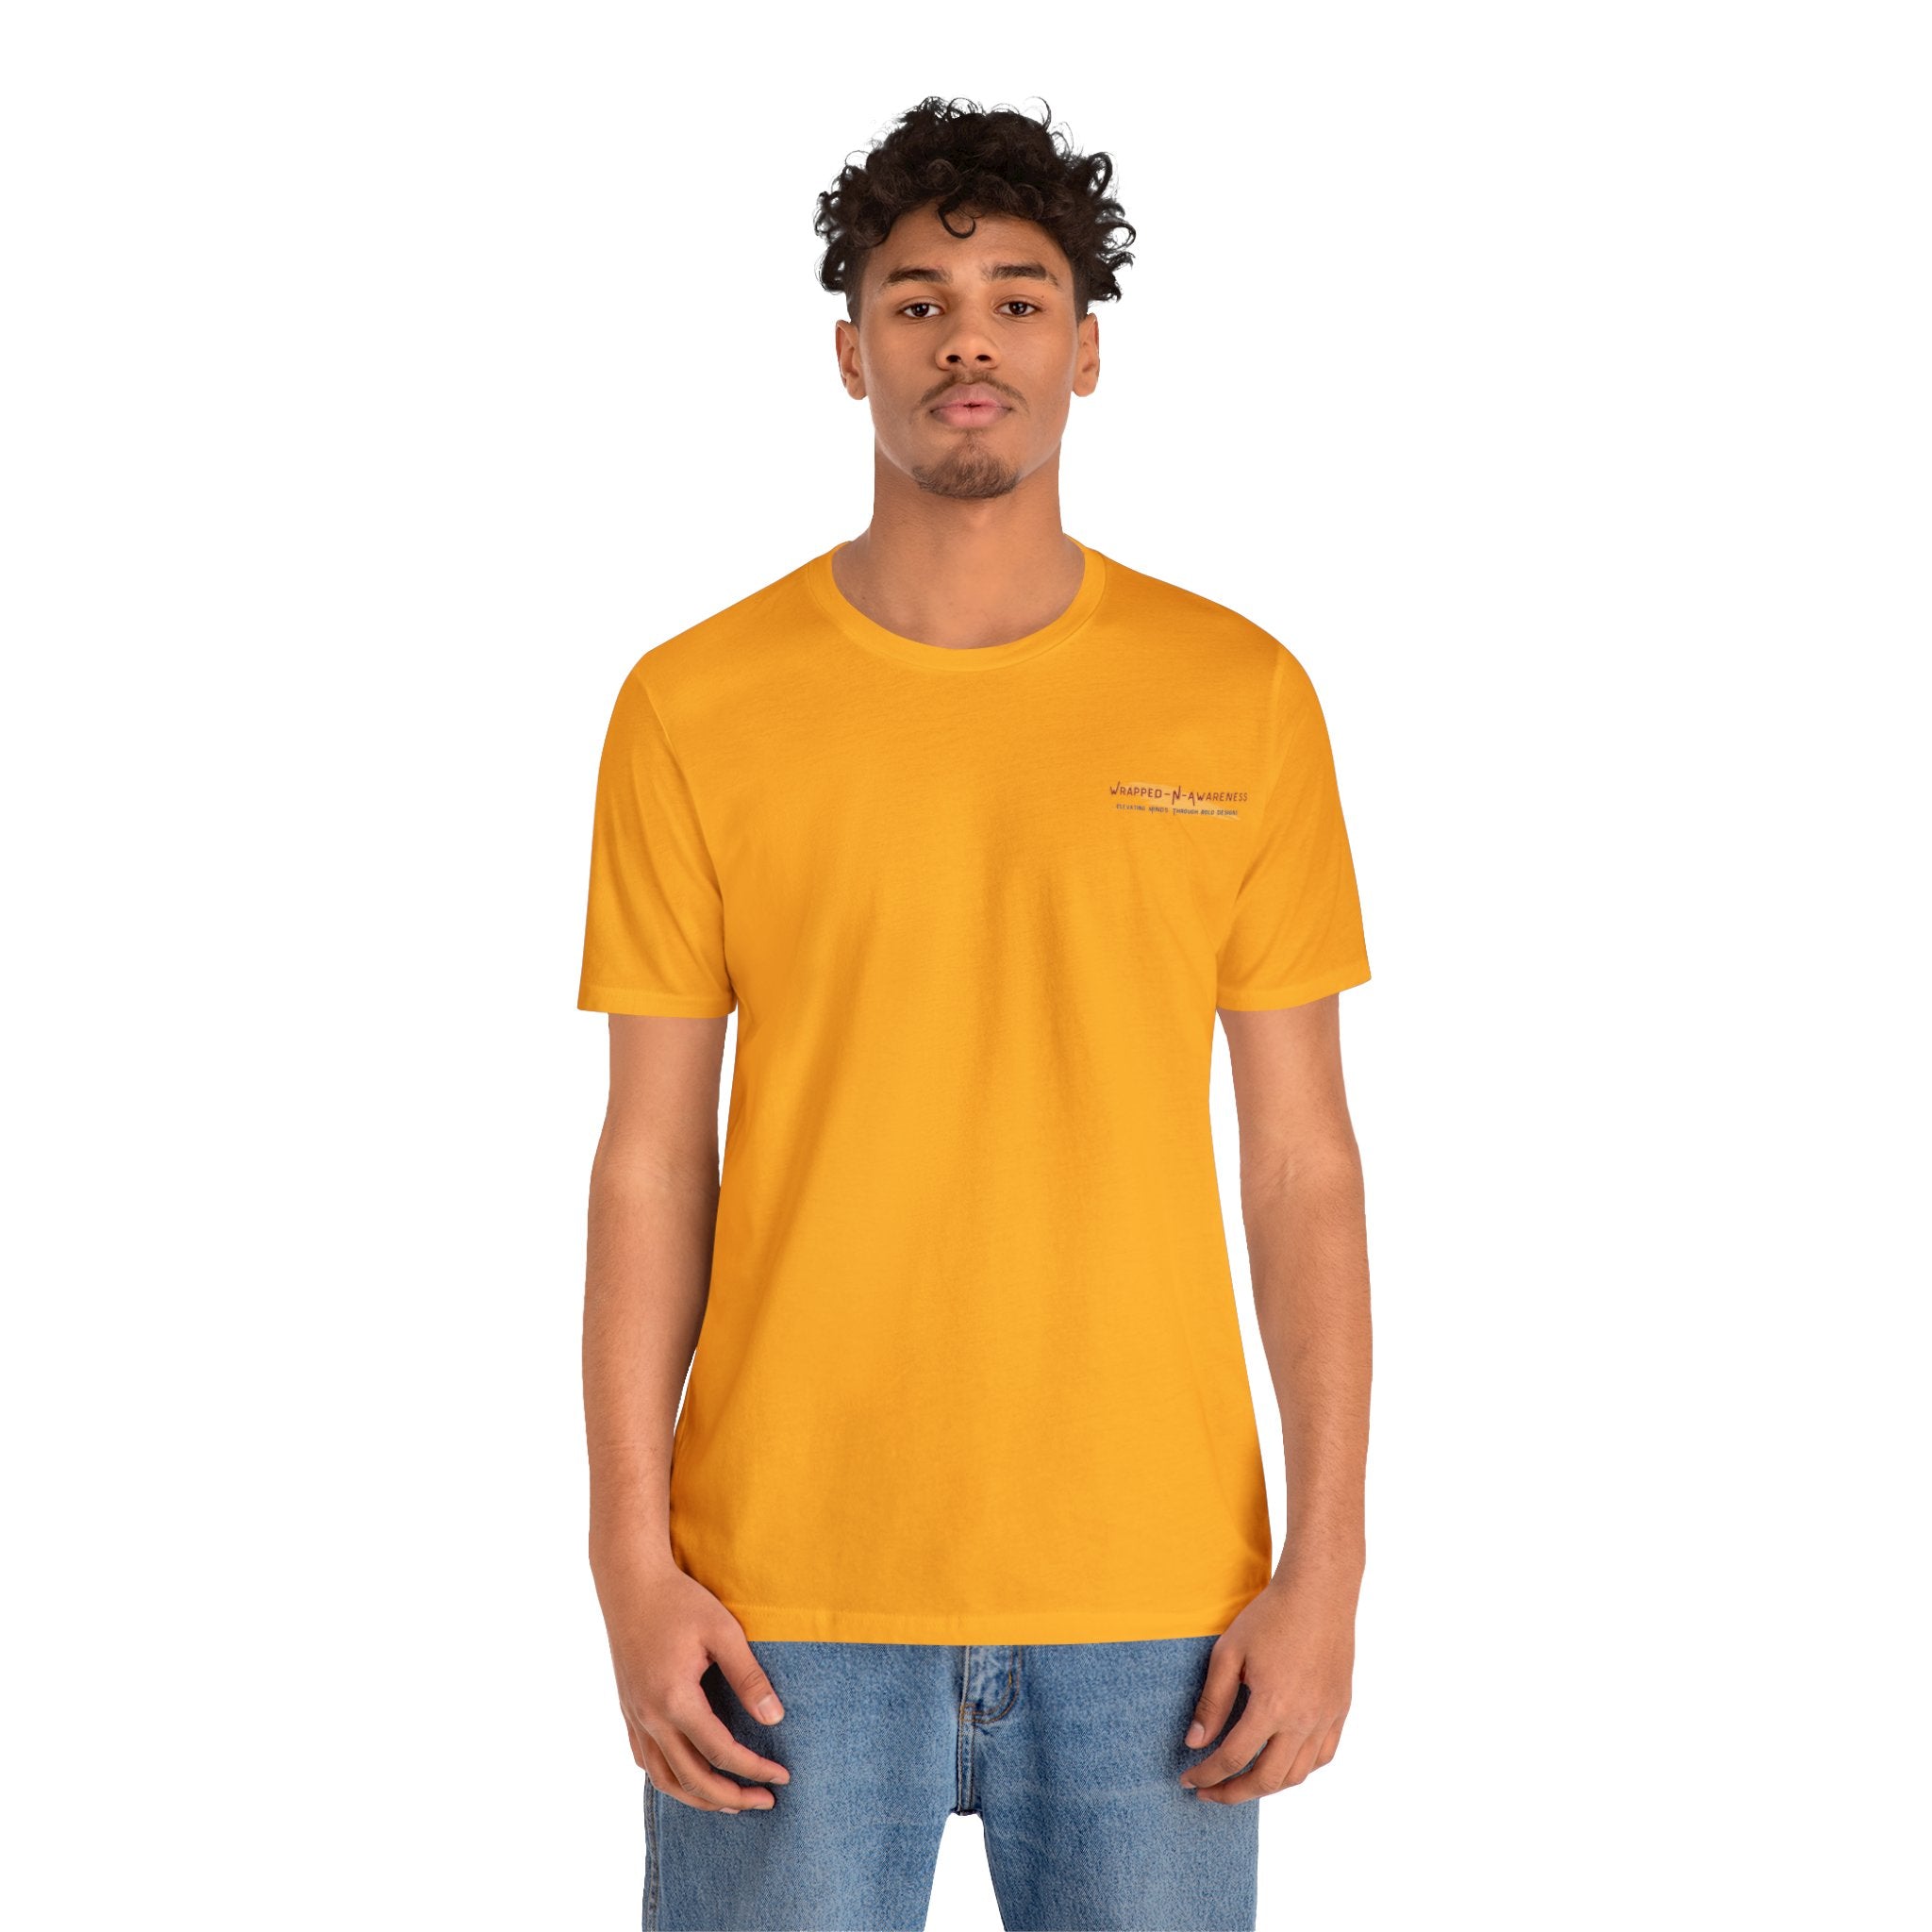 Progress Over Perfection Tee - Bella+Canvas 3001 Yellow Airlume Cotton Bella+Canvas 3001 Crew Neckline Jersey Short Sleeve Lightweight Fabric Mental Health Support Retail Fit Tear-away Label Tee Unisex Tee T-Shirt 10770264541665396783_2048 Printify